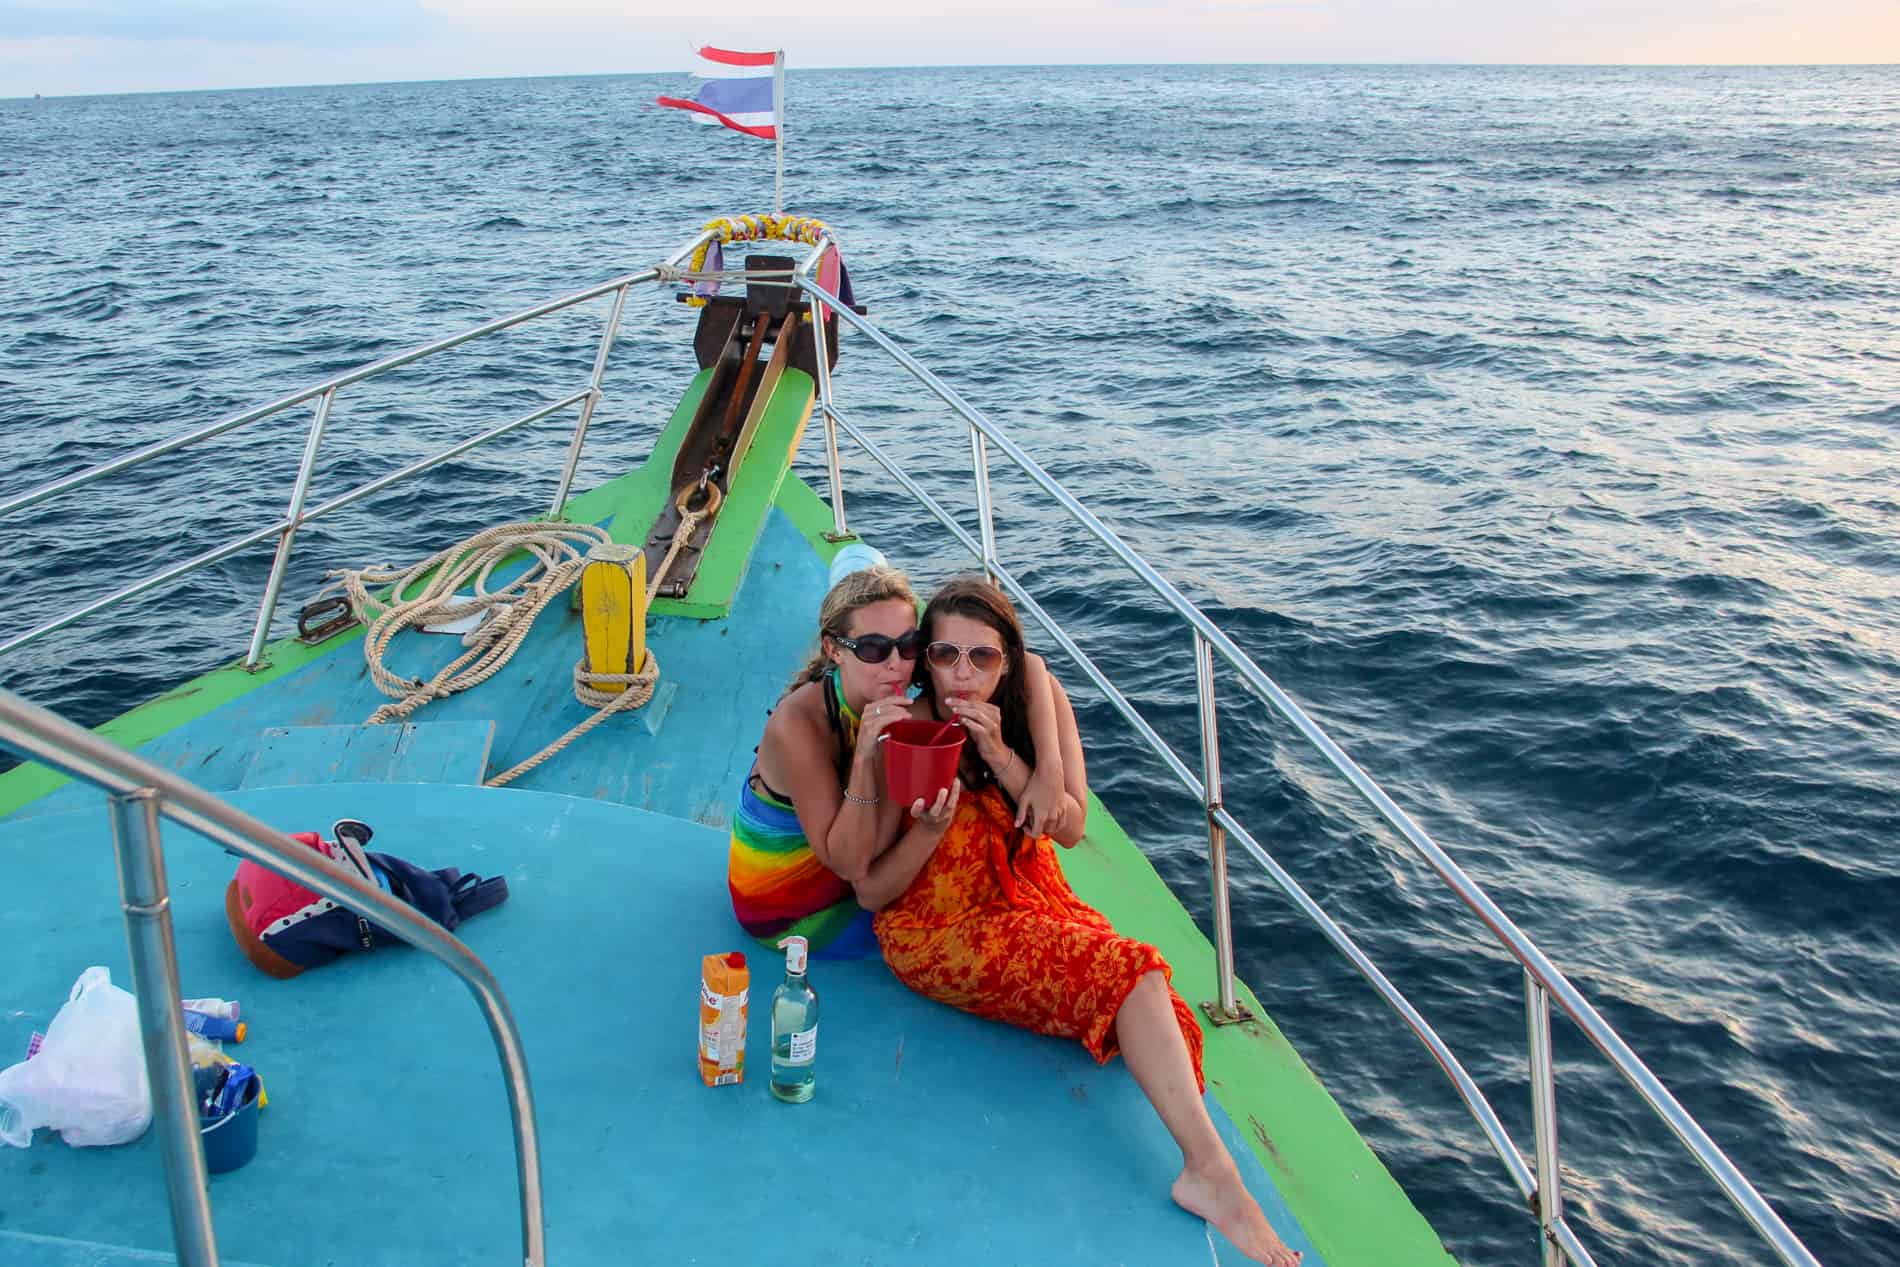 Two women in sarongs drinking through straws from a red bucket while on deck of a boat in Thailand. 